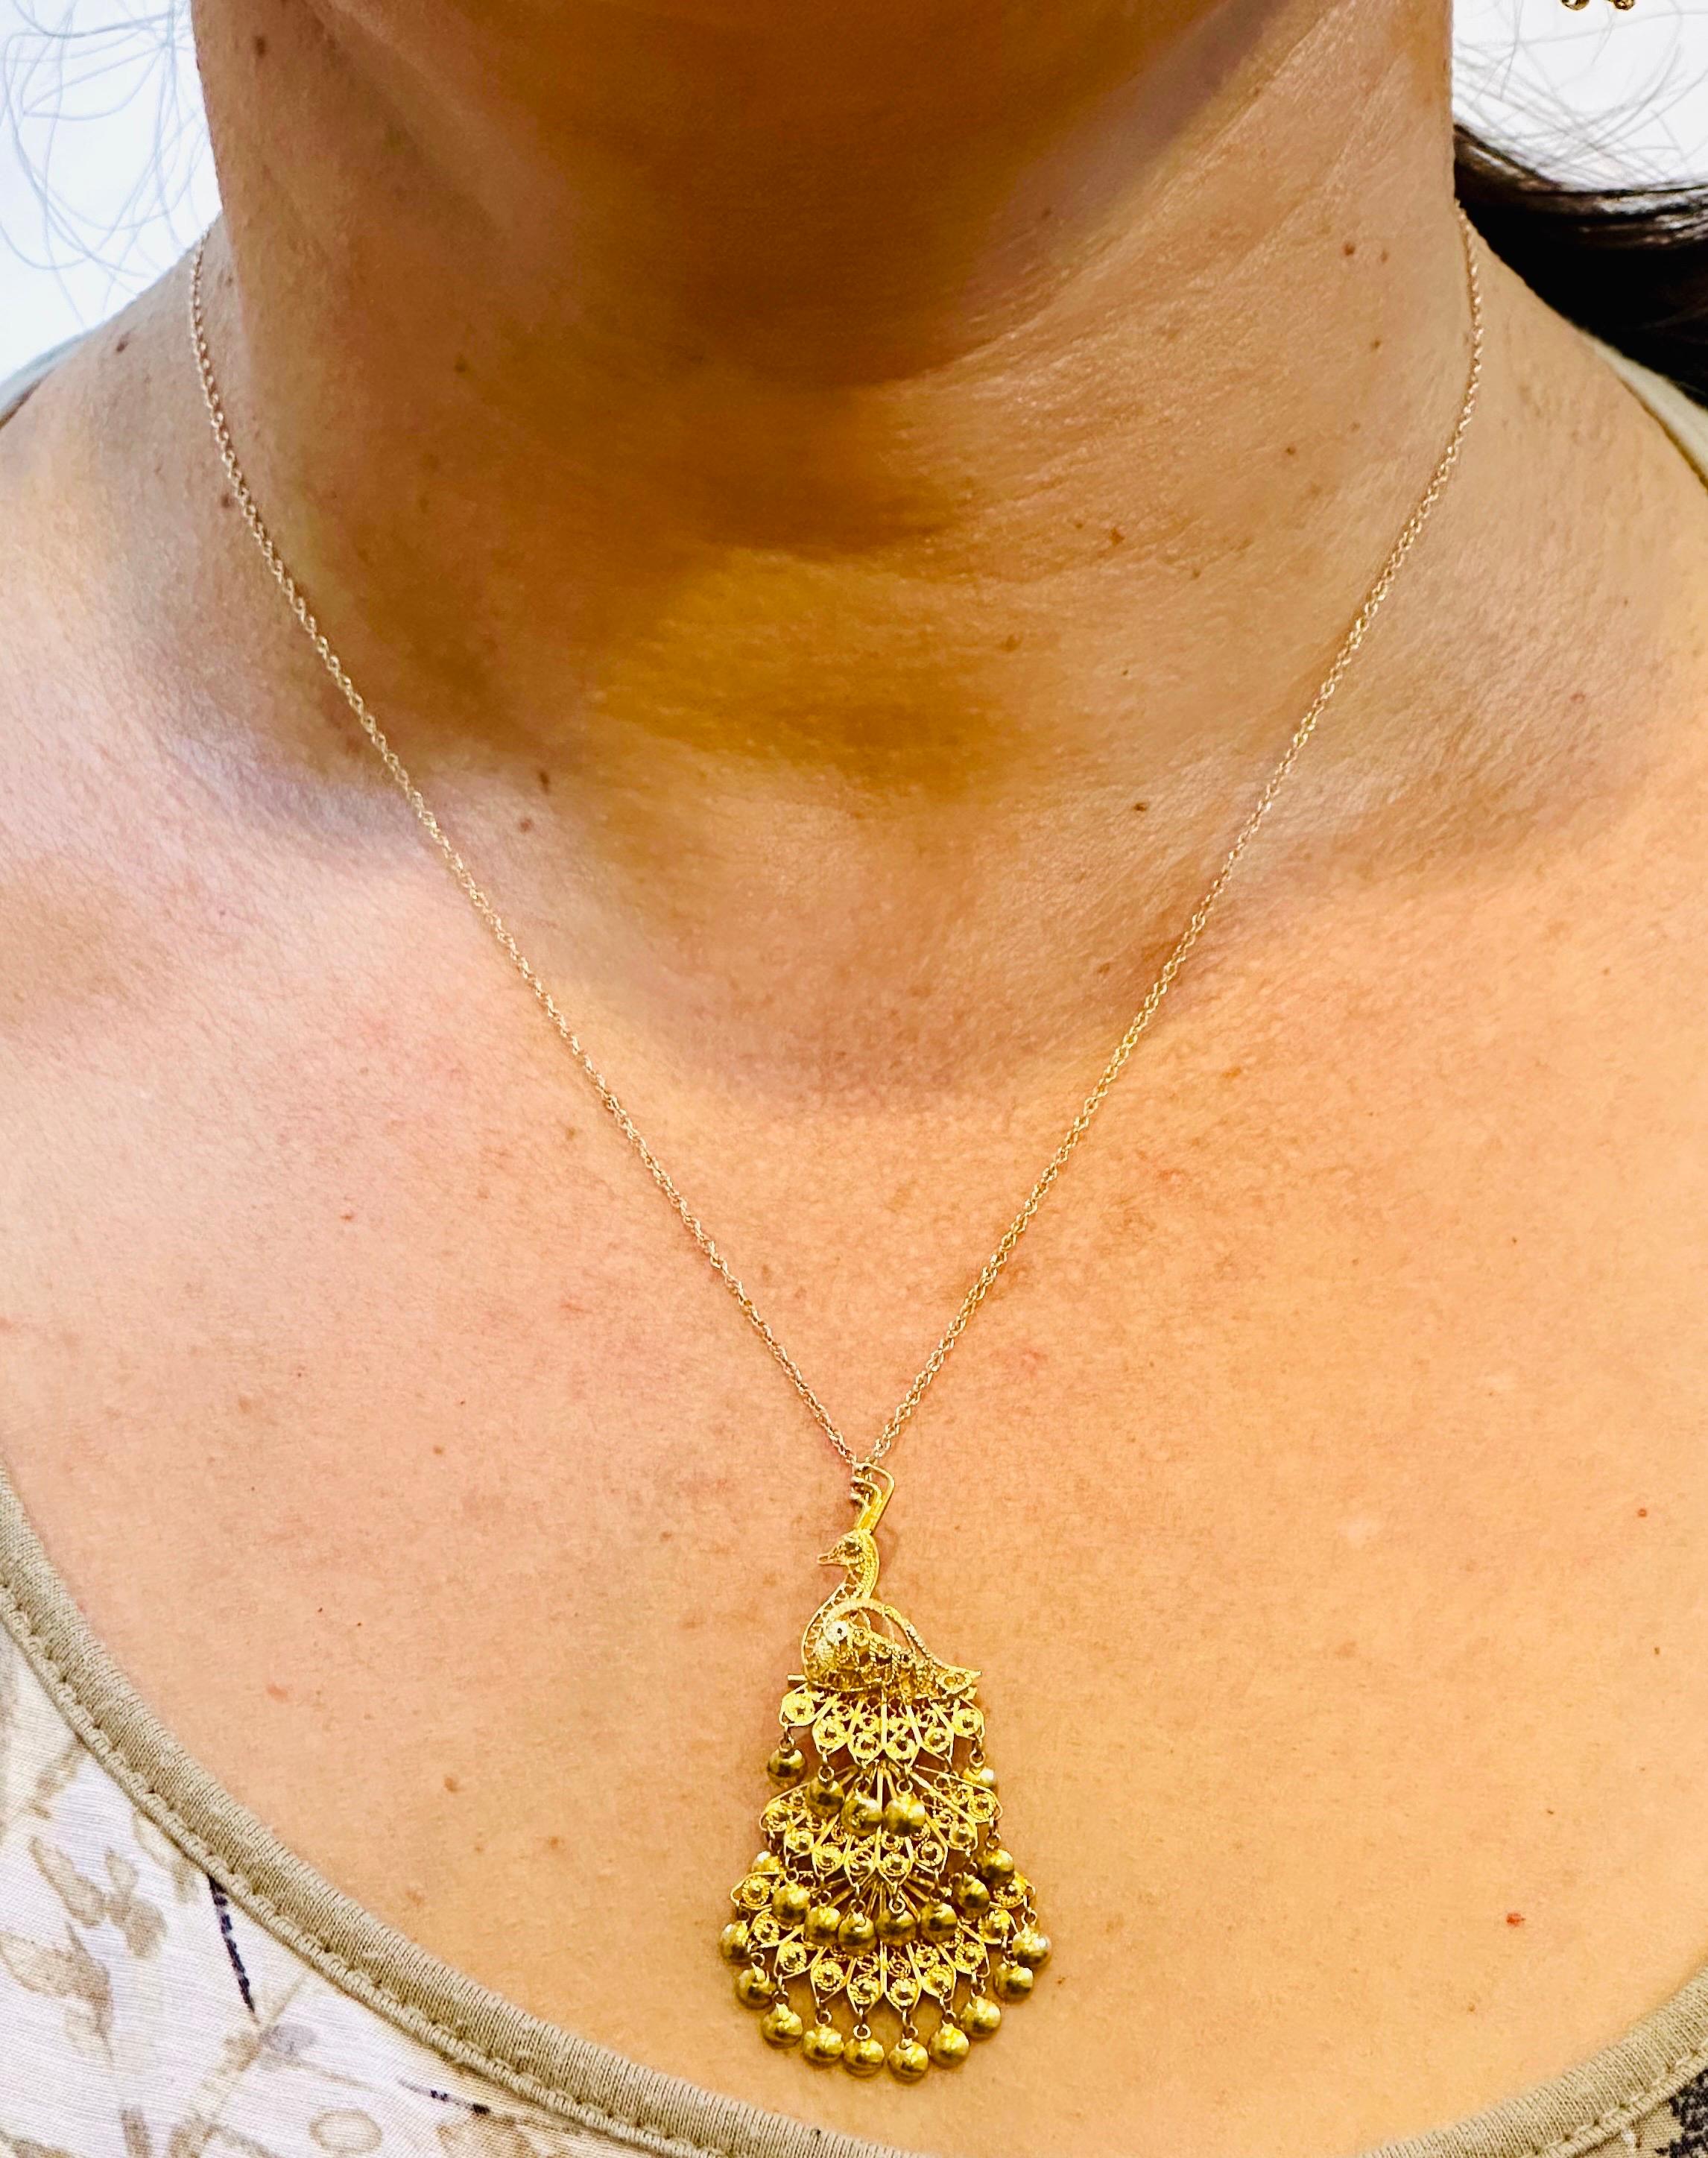 Vintage 24 Kt Yellow Gold 3.4 Gm Peacock Pin / Pendant + 14 K Chain Necklace 2